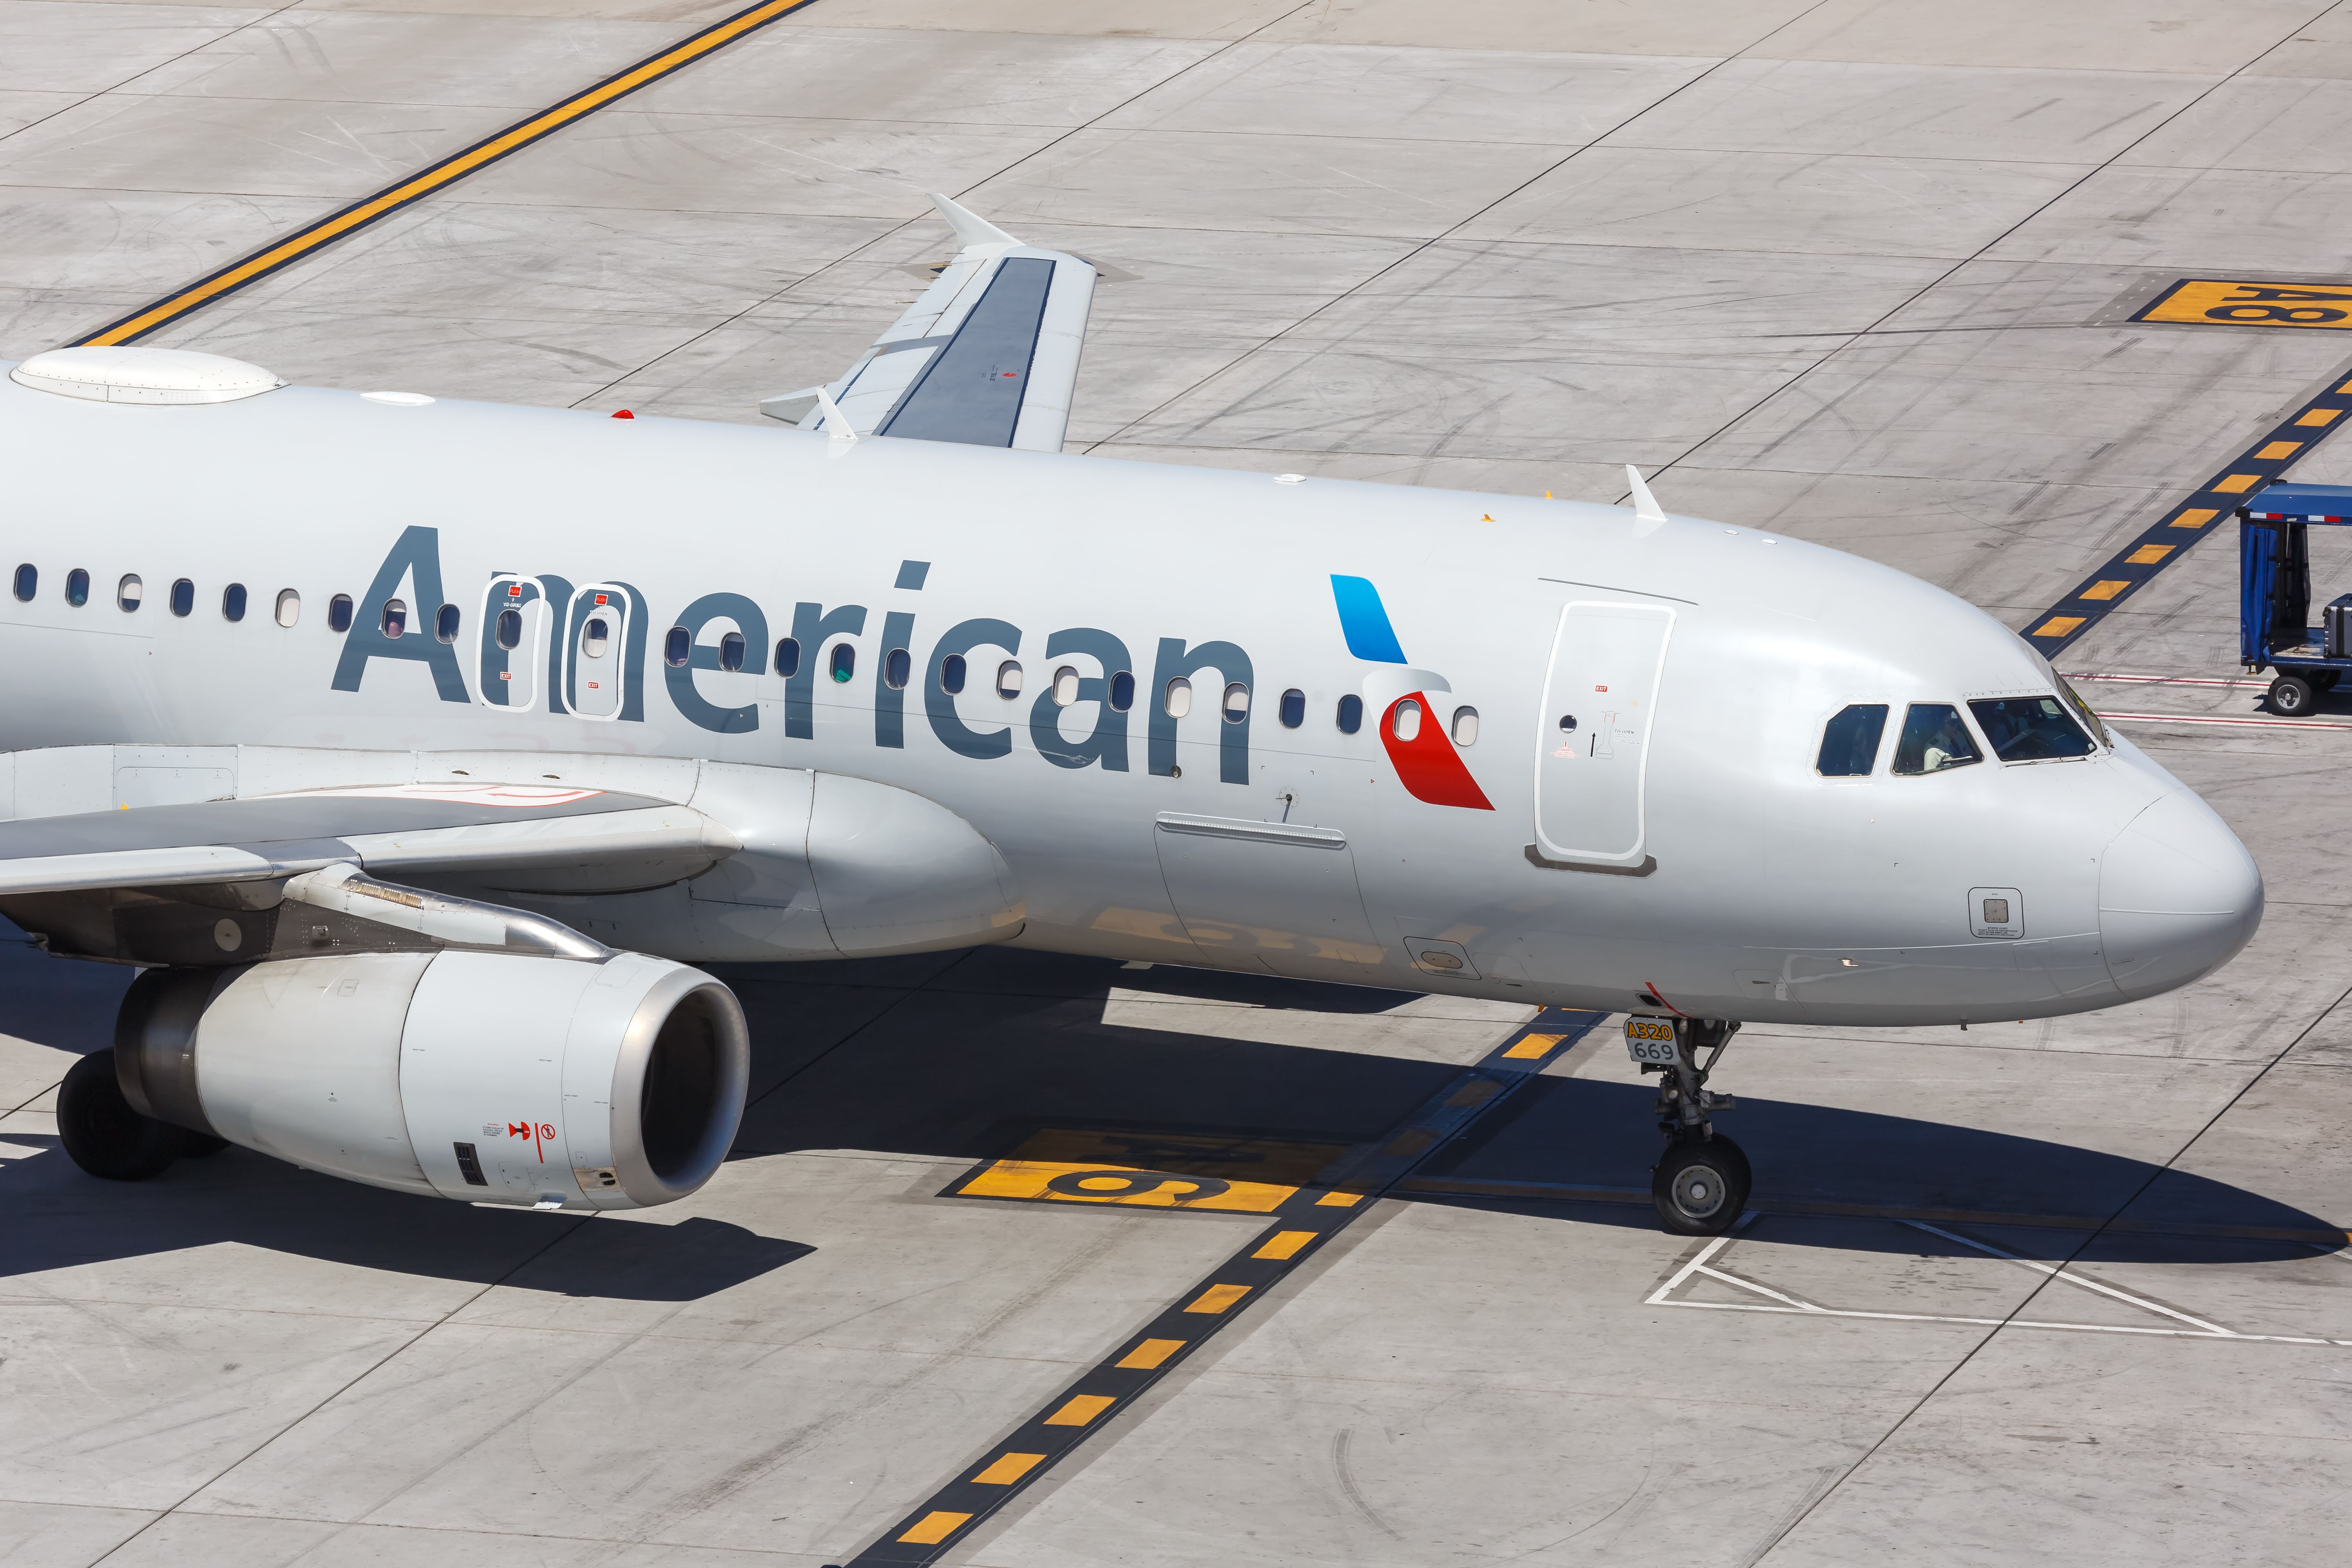 An American Airlines Airbus A320 on an airport apron.